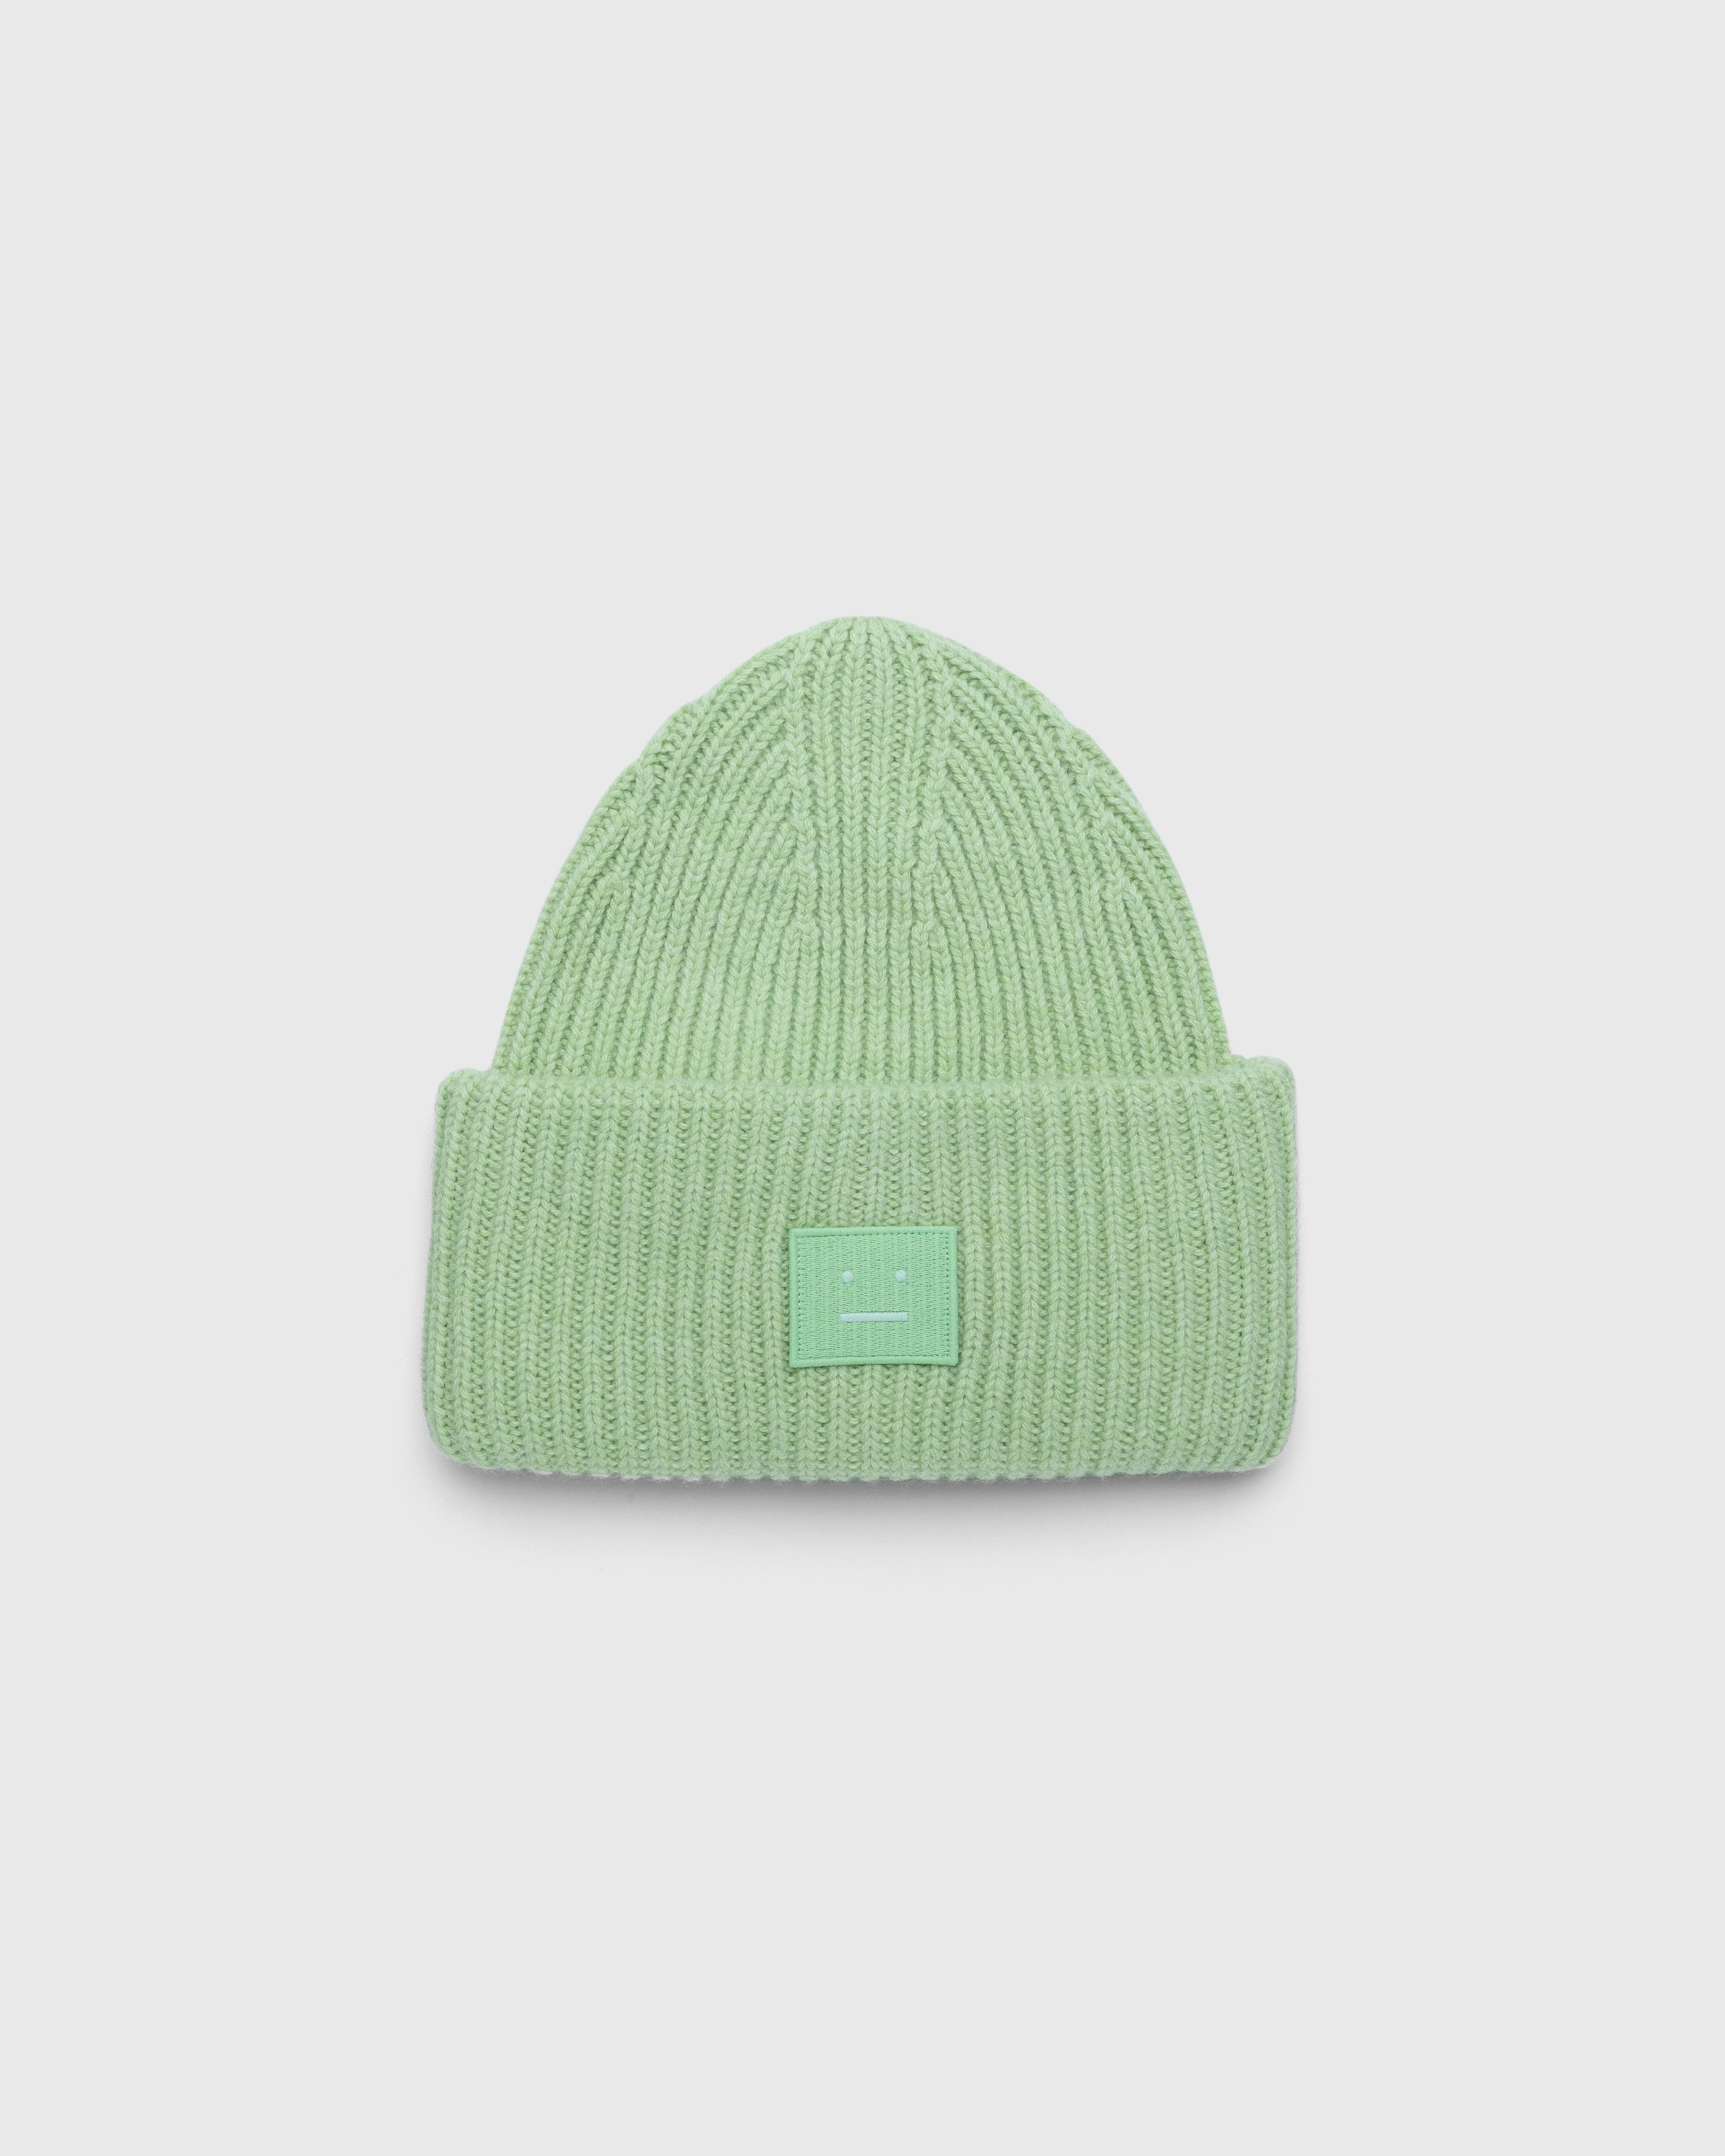 Acne Studios - Knit Face Patch Beanie Pale Green - Accessories - Green - Image 1